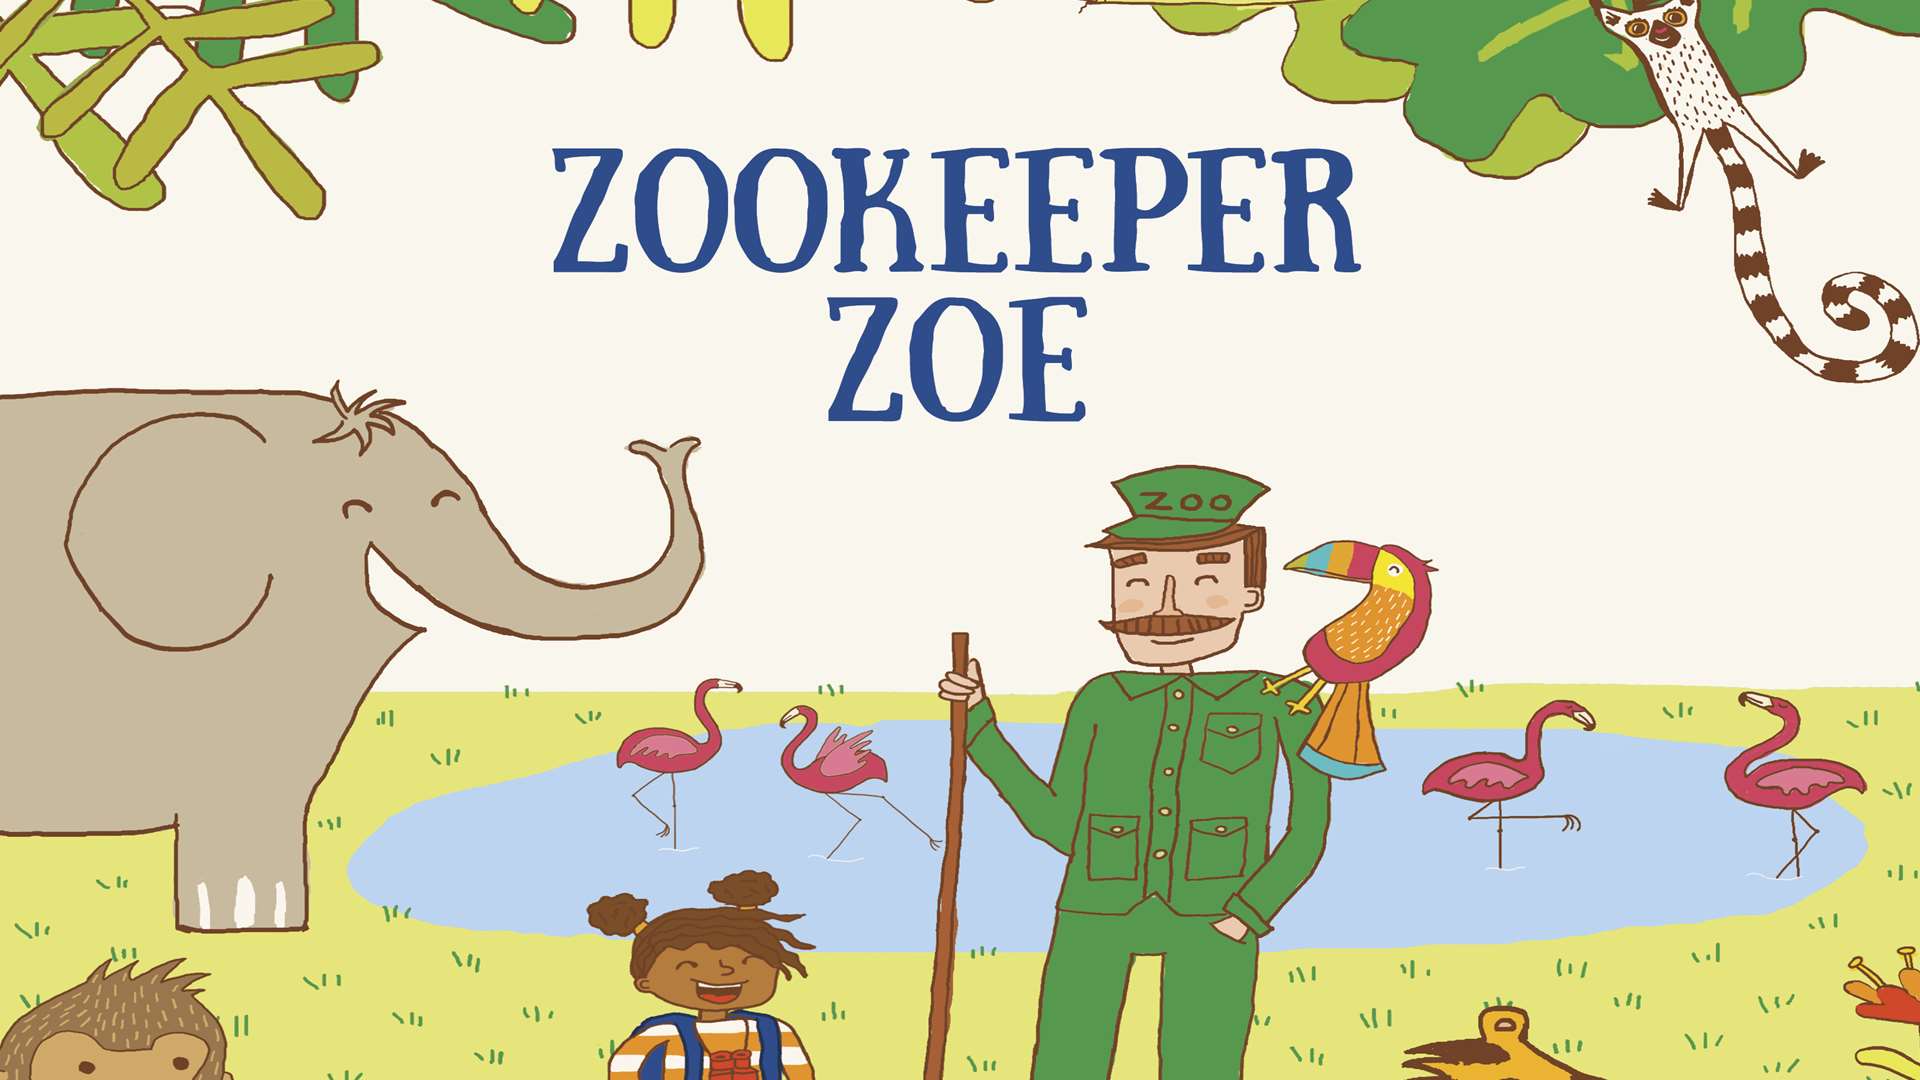 Zoekeeper Zoe is available in Boots stores and from zookeeperzoe.co.uk